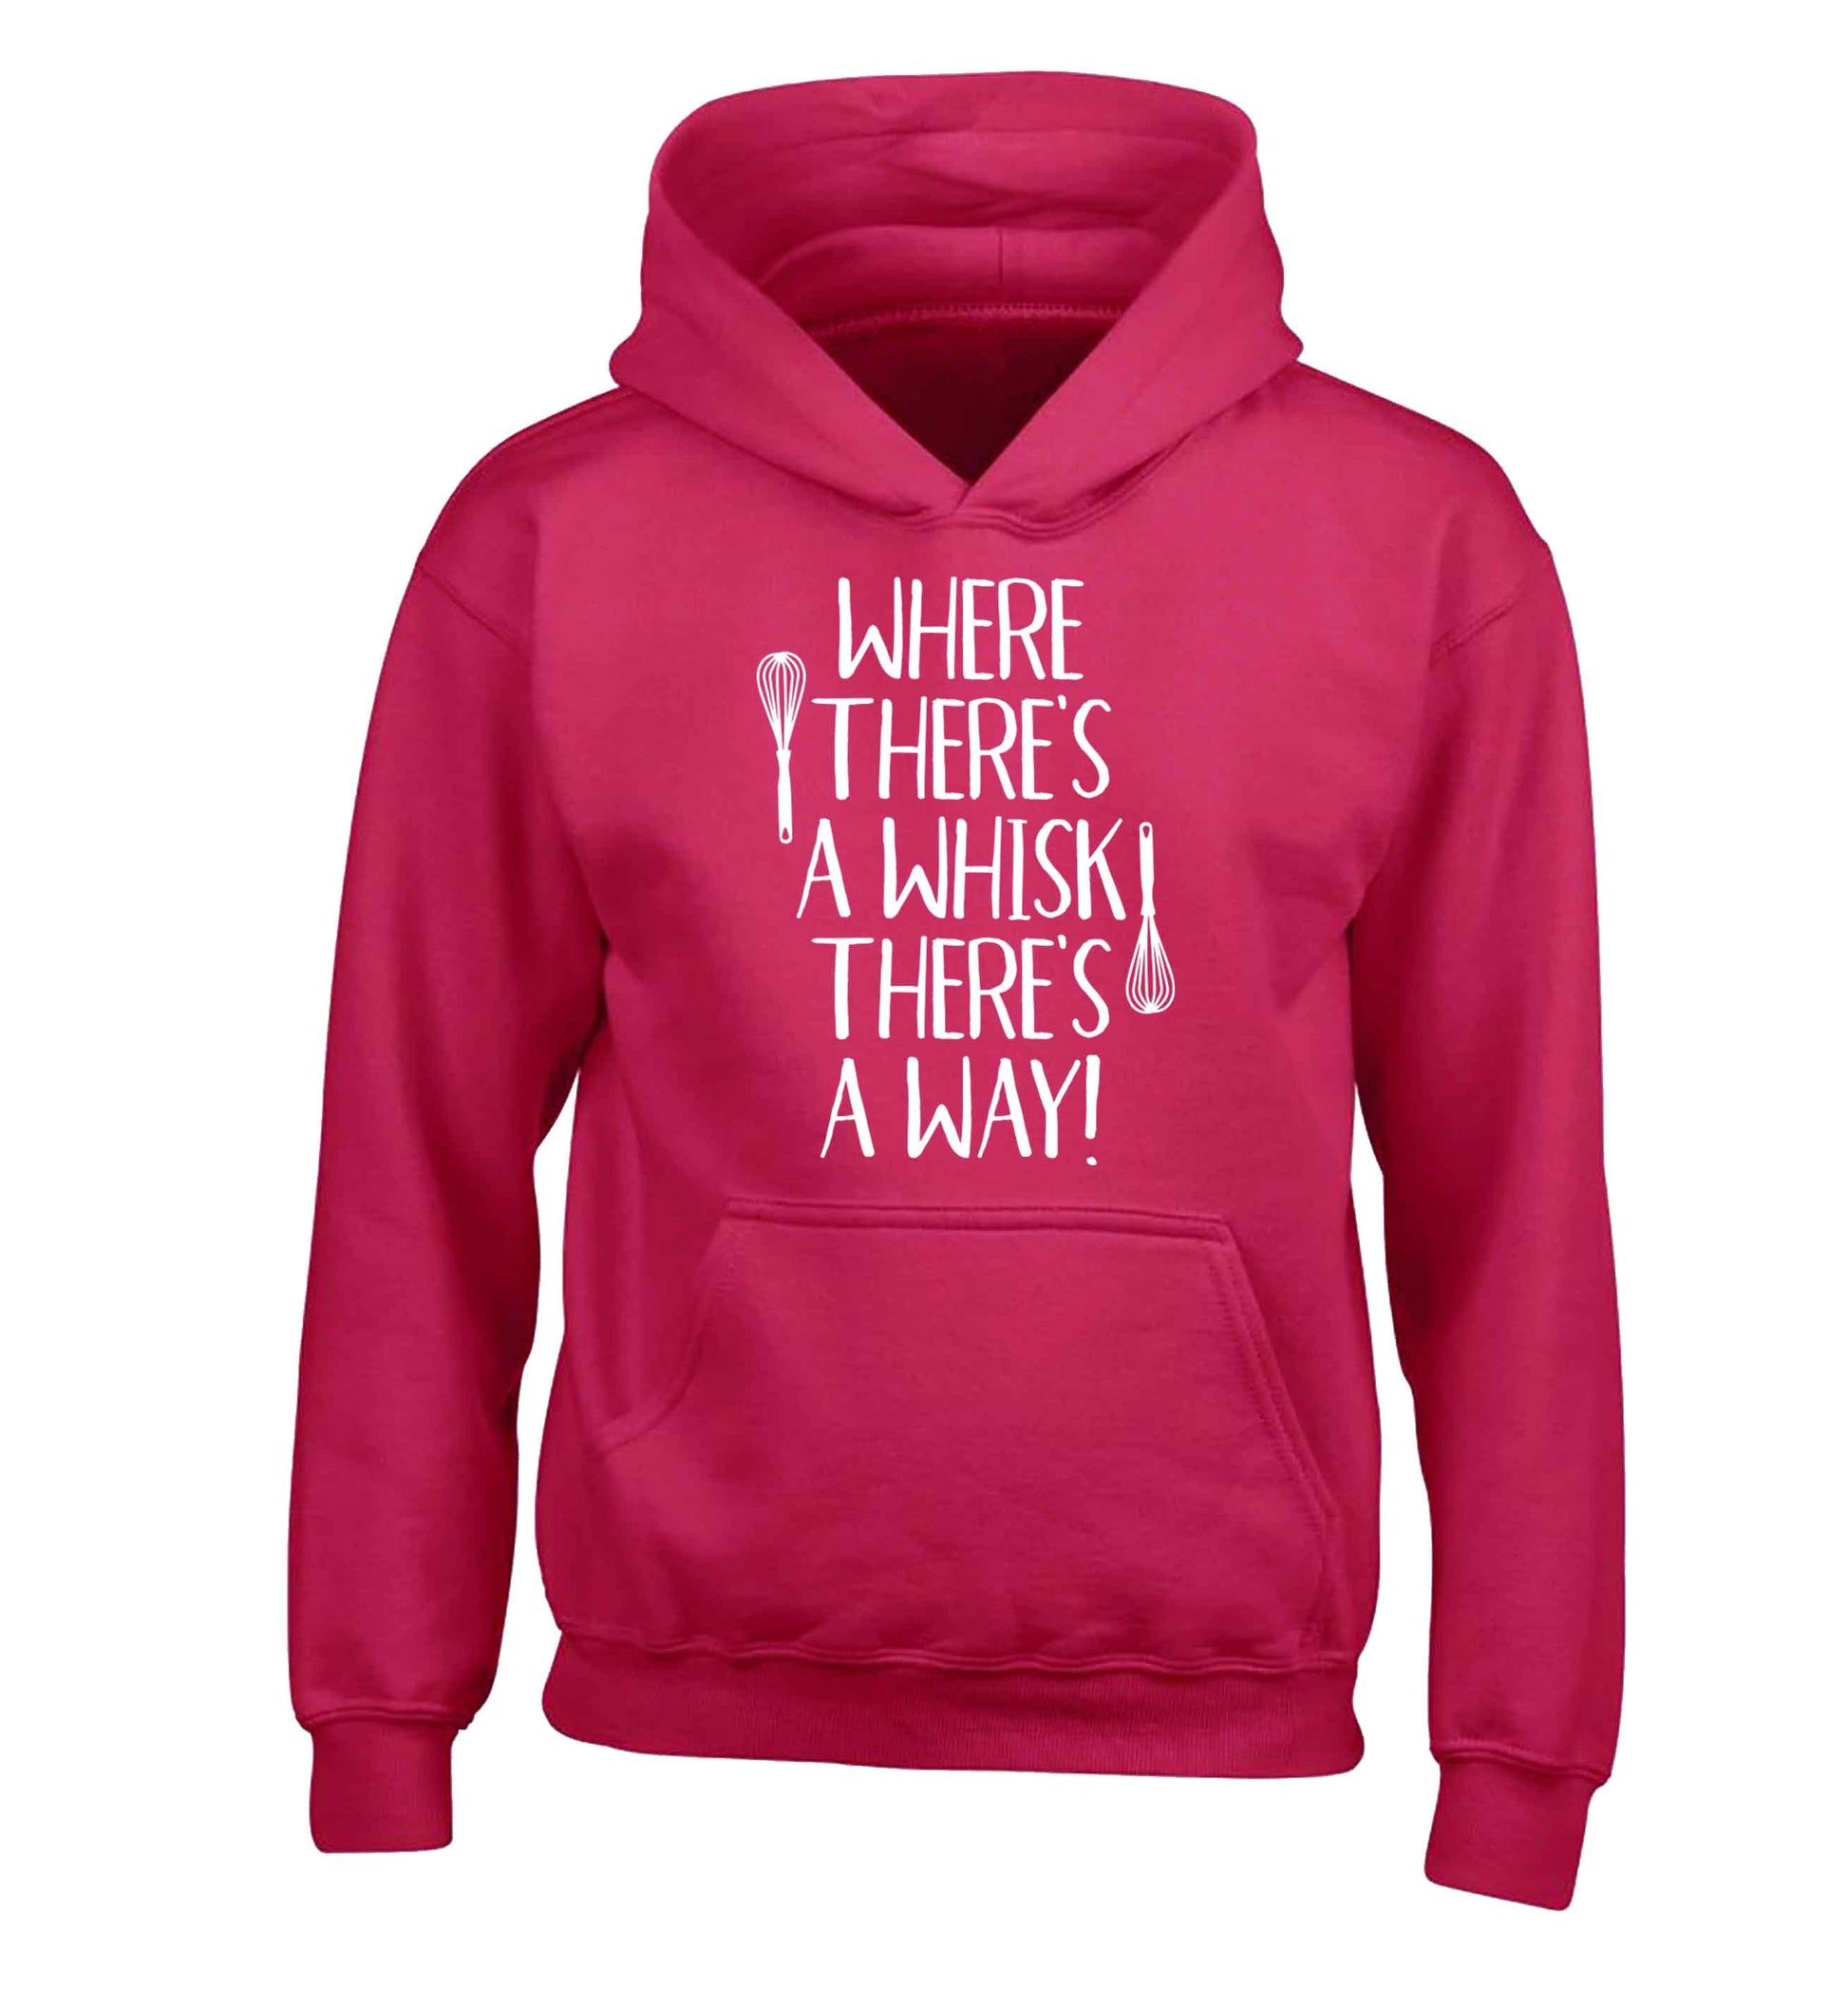 Where there's a whisk there's a way children's pink hoodie 12-13 Years